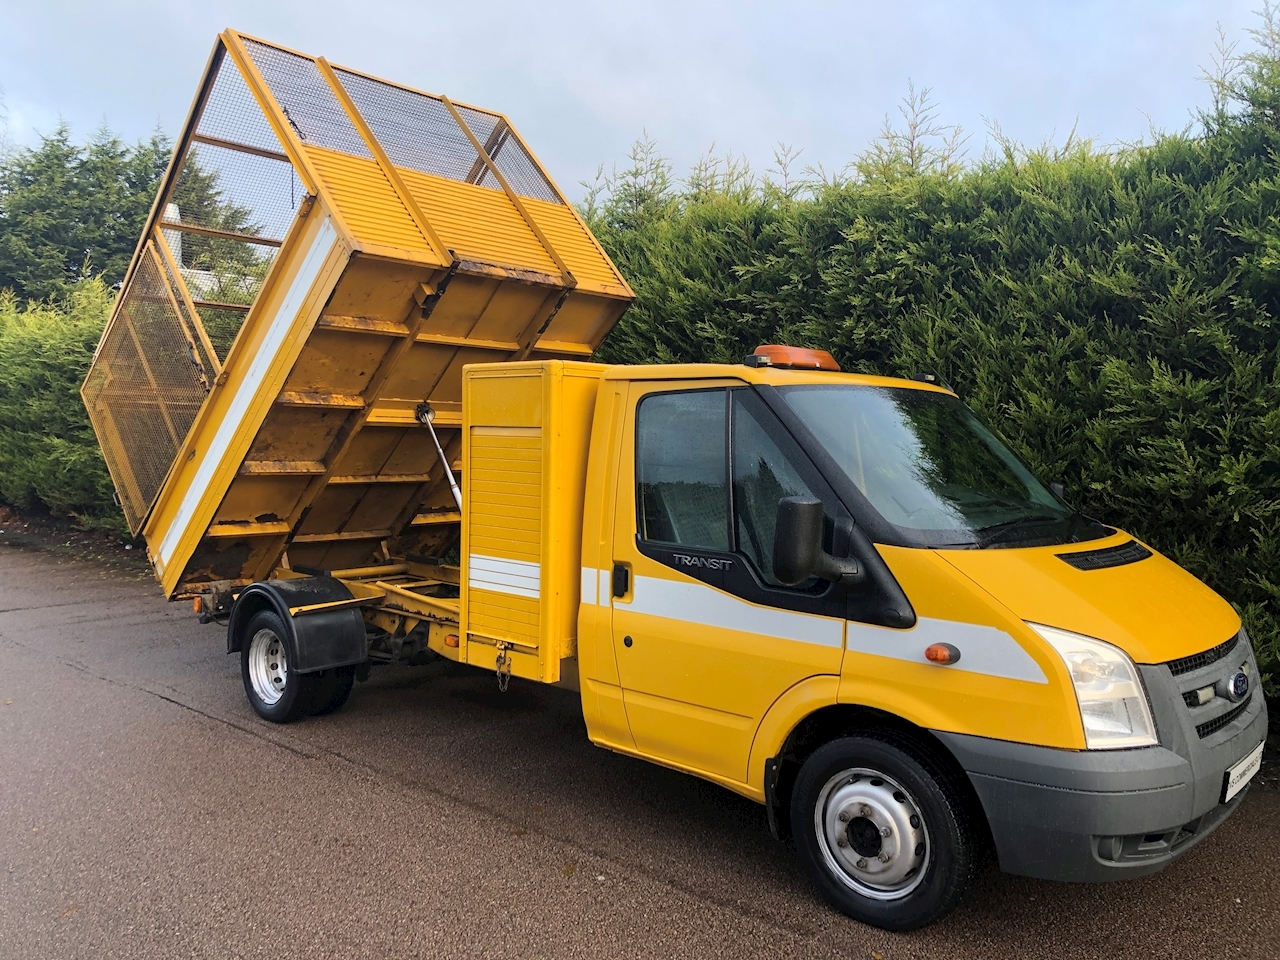 transit tippers for sale